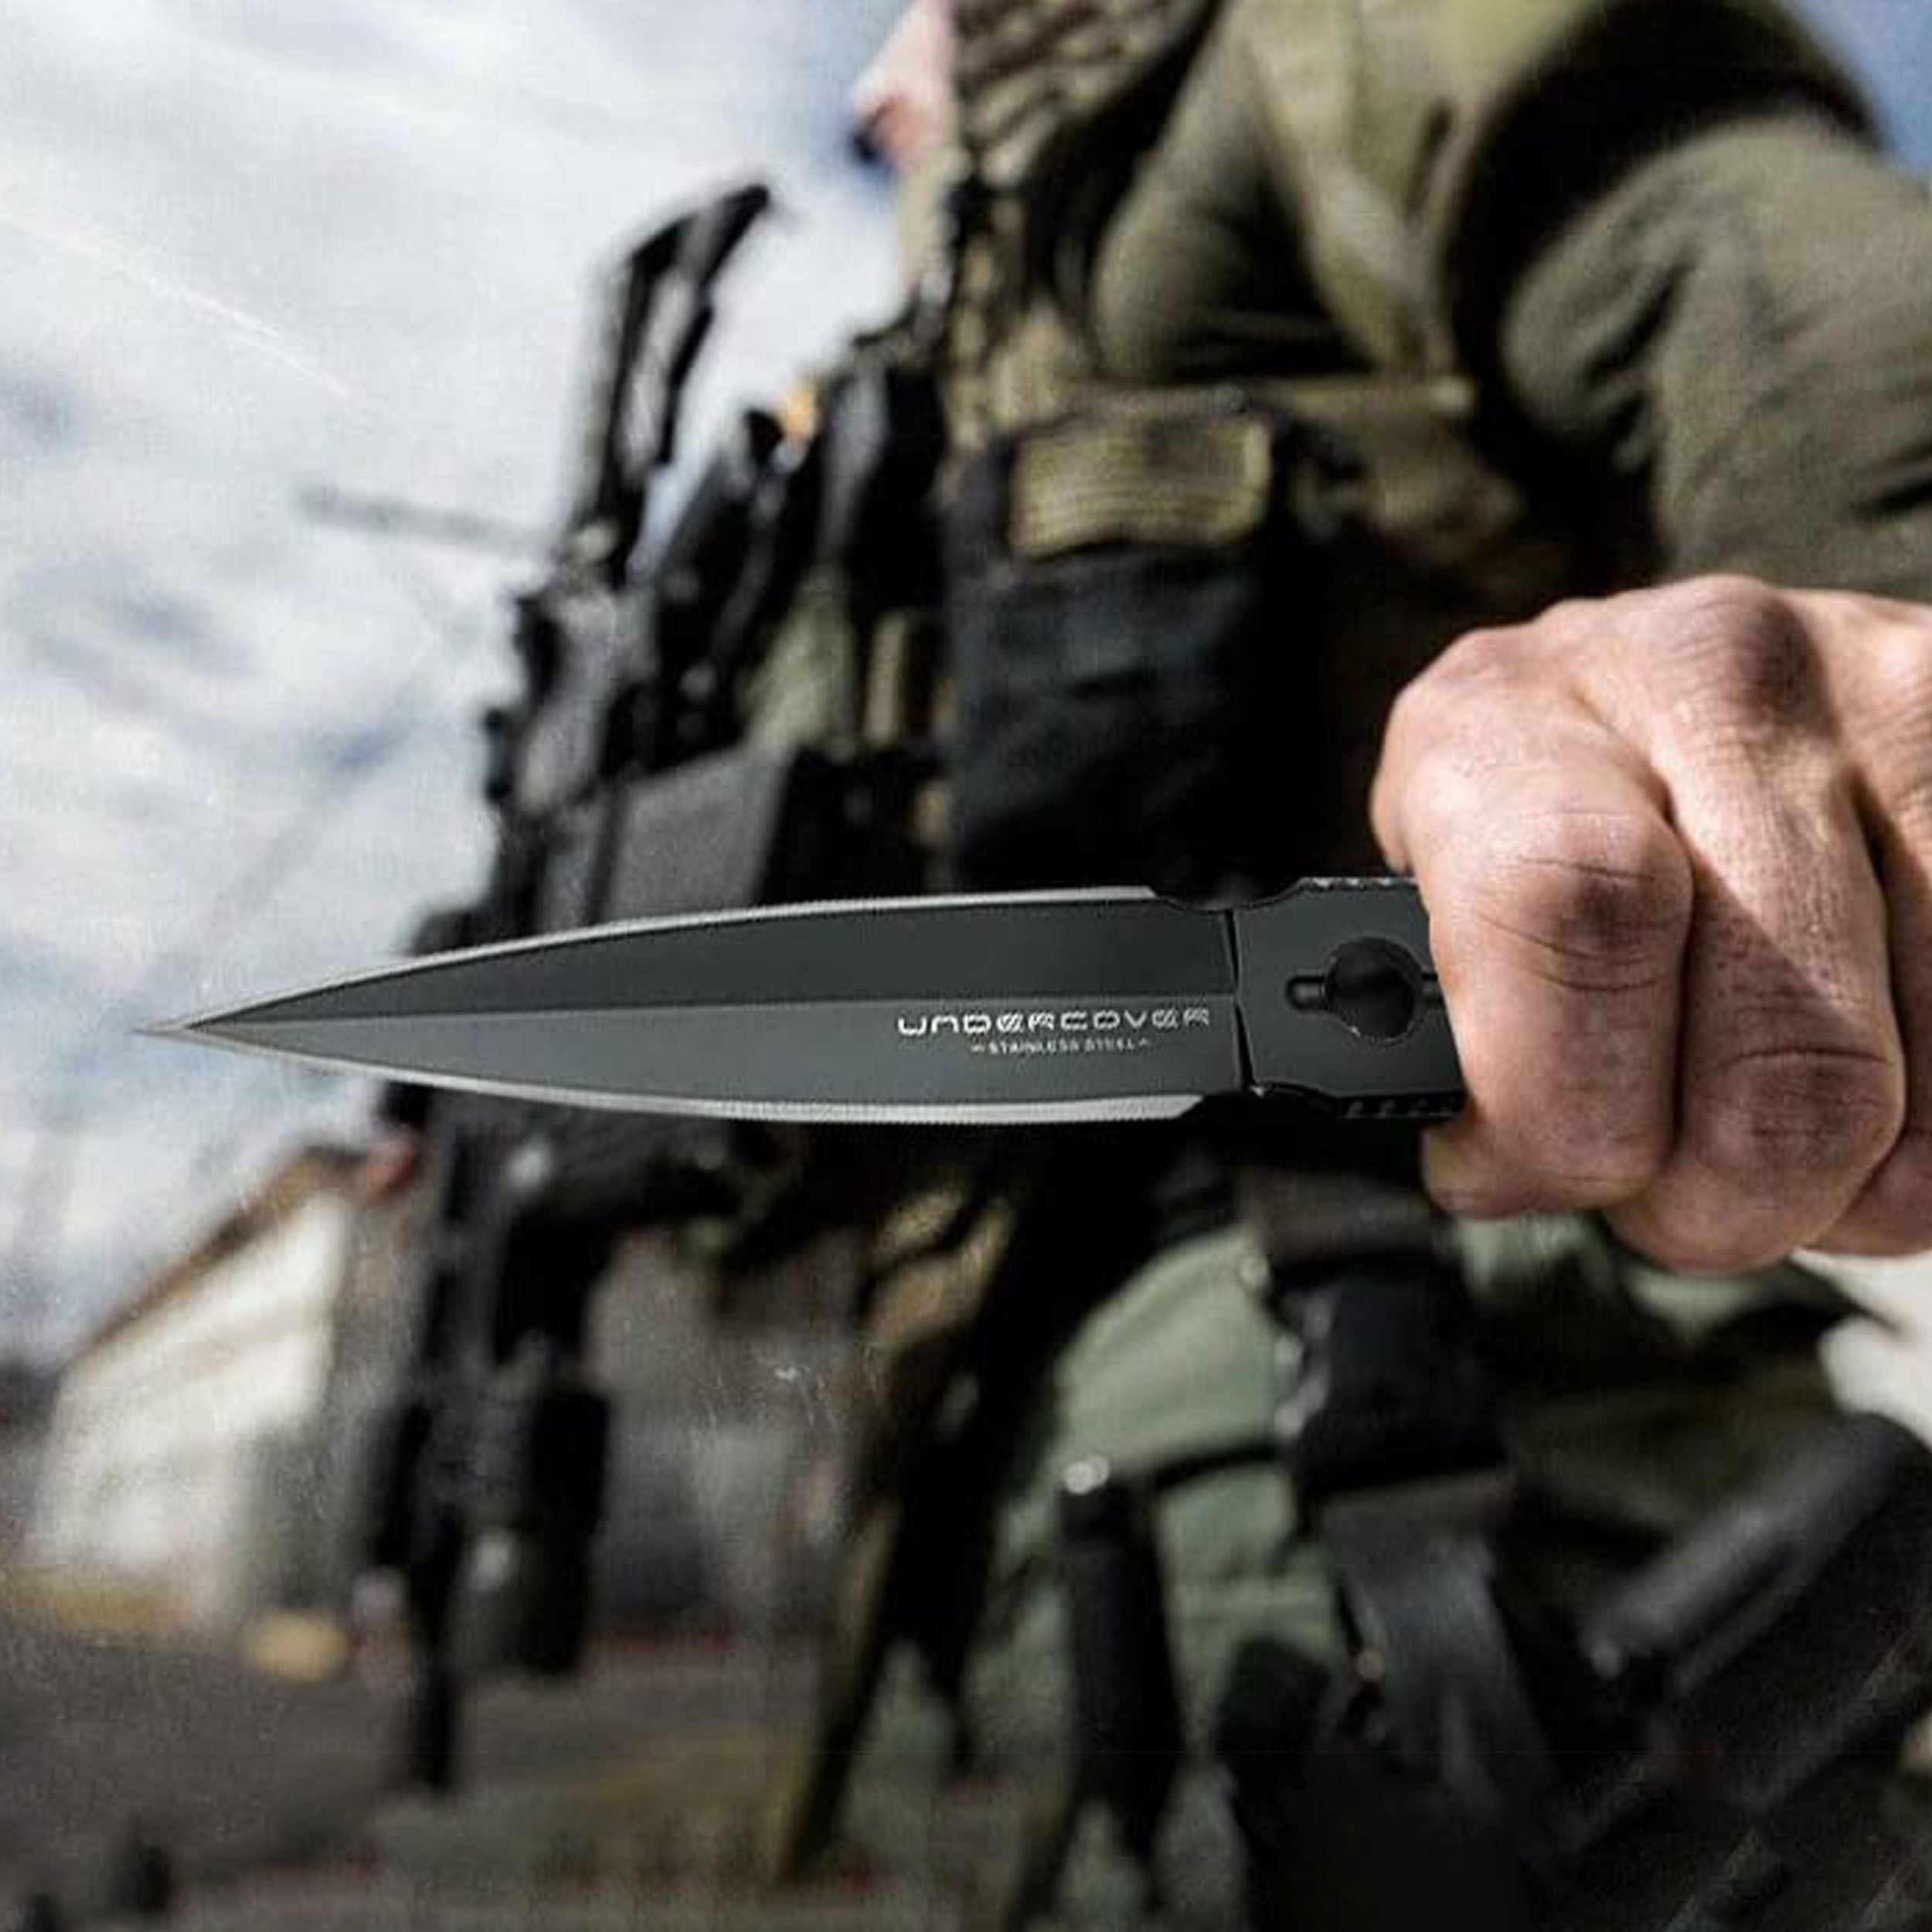 Undercover CIA Stinger Knife and Sheath